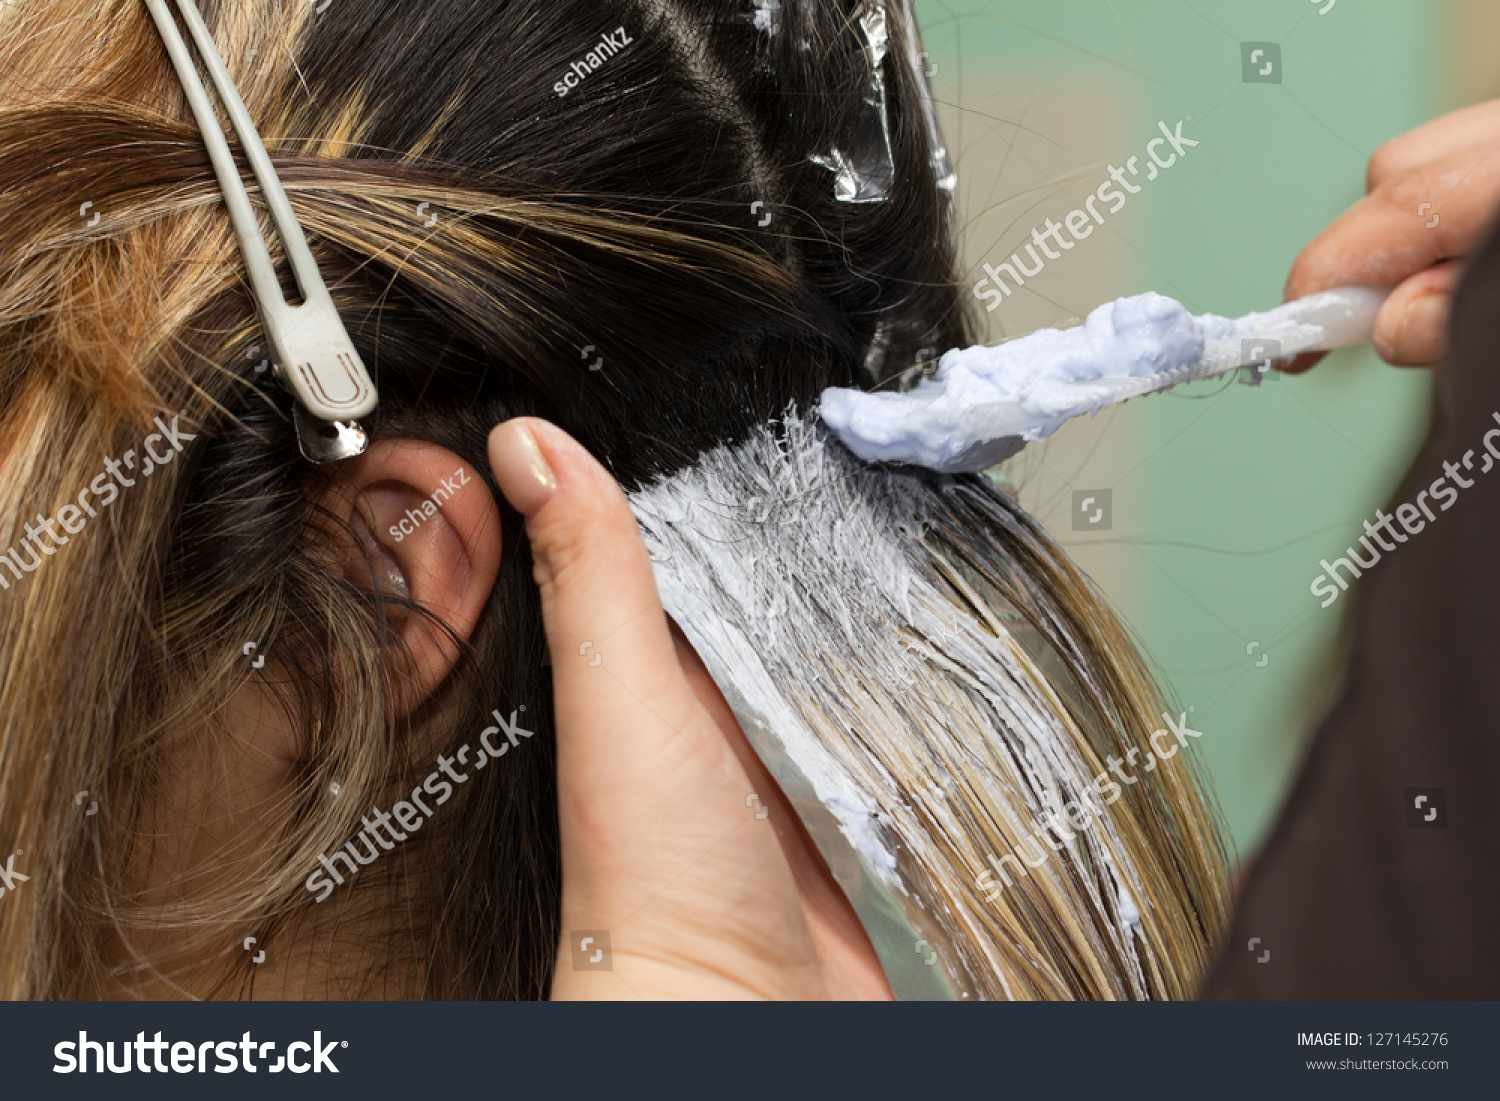 http://image.shutterstock.com/z/stock-photo-hair-colouring-in-process-127145276.jpg